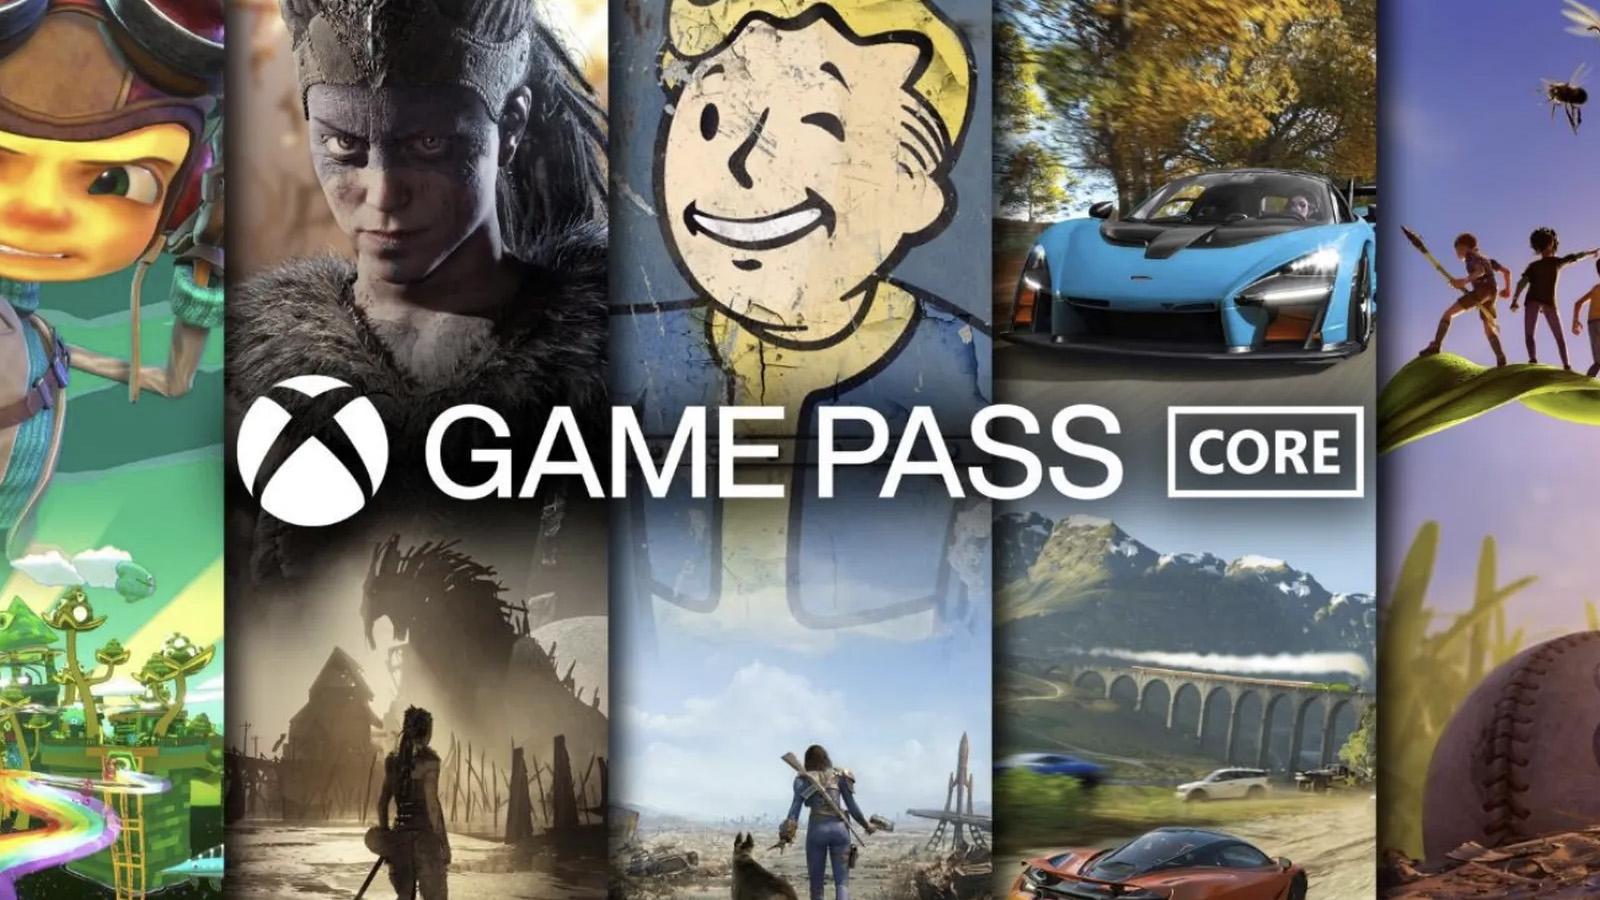 Xbox Game Pass Ultimate Due for Yet Another Ridiculous Price Rise